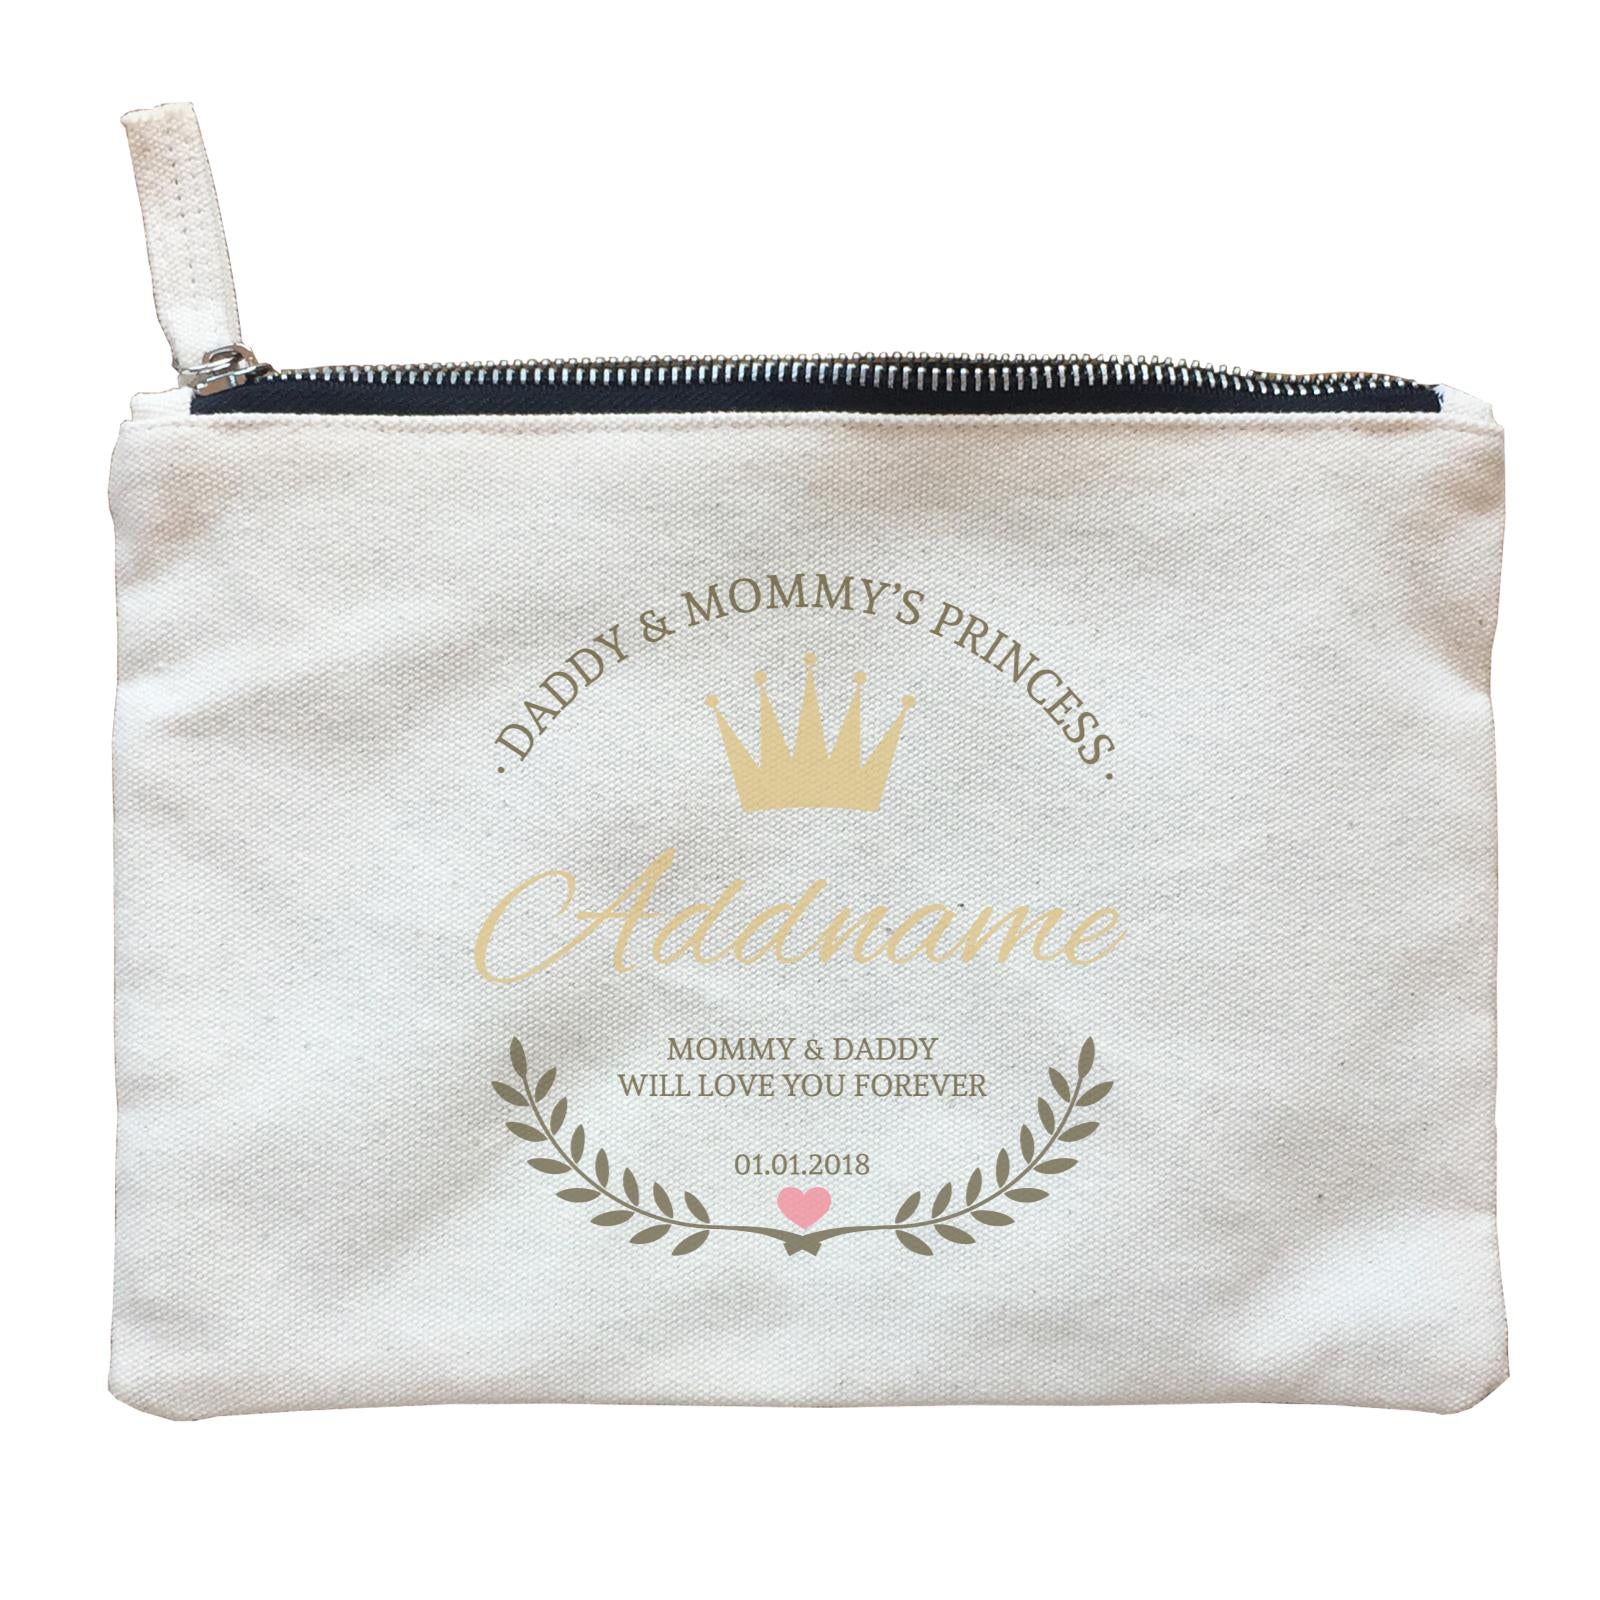 Daddy and Mommy's Princess with Tiara Wreath Personazliable with Name Text and Date Zipper Pouch